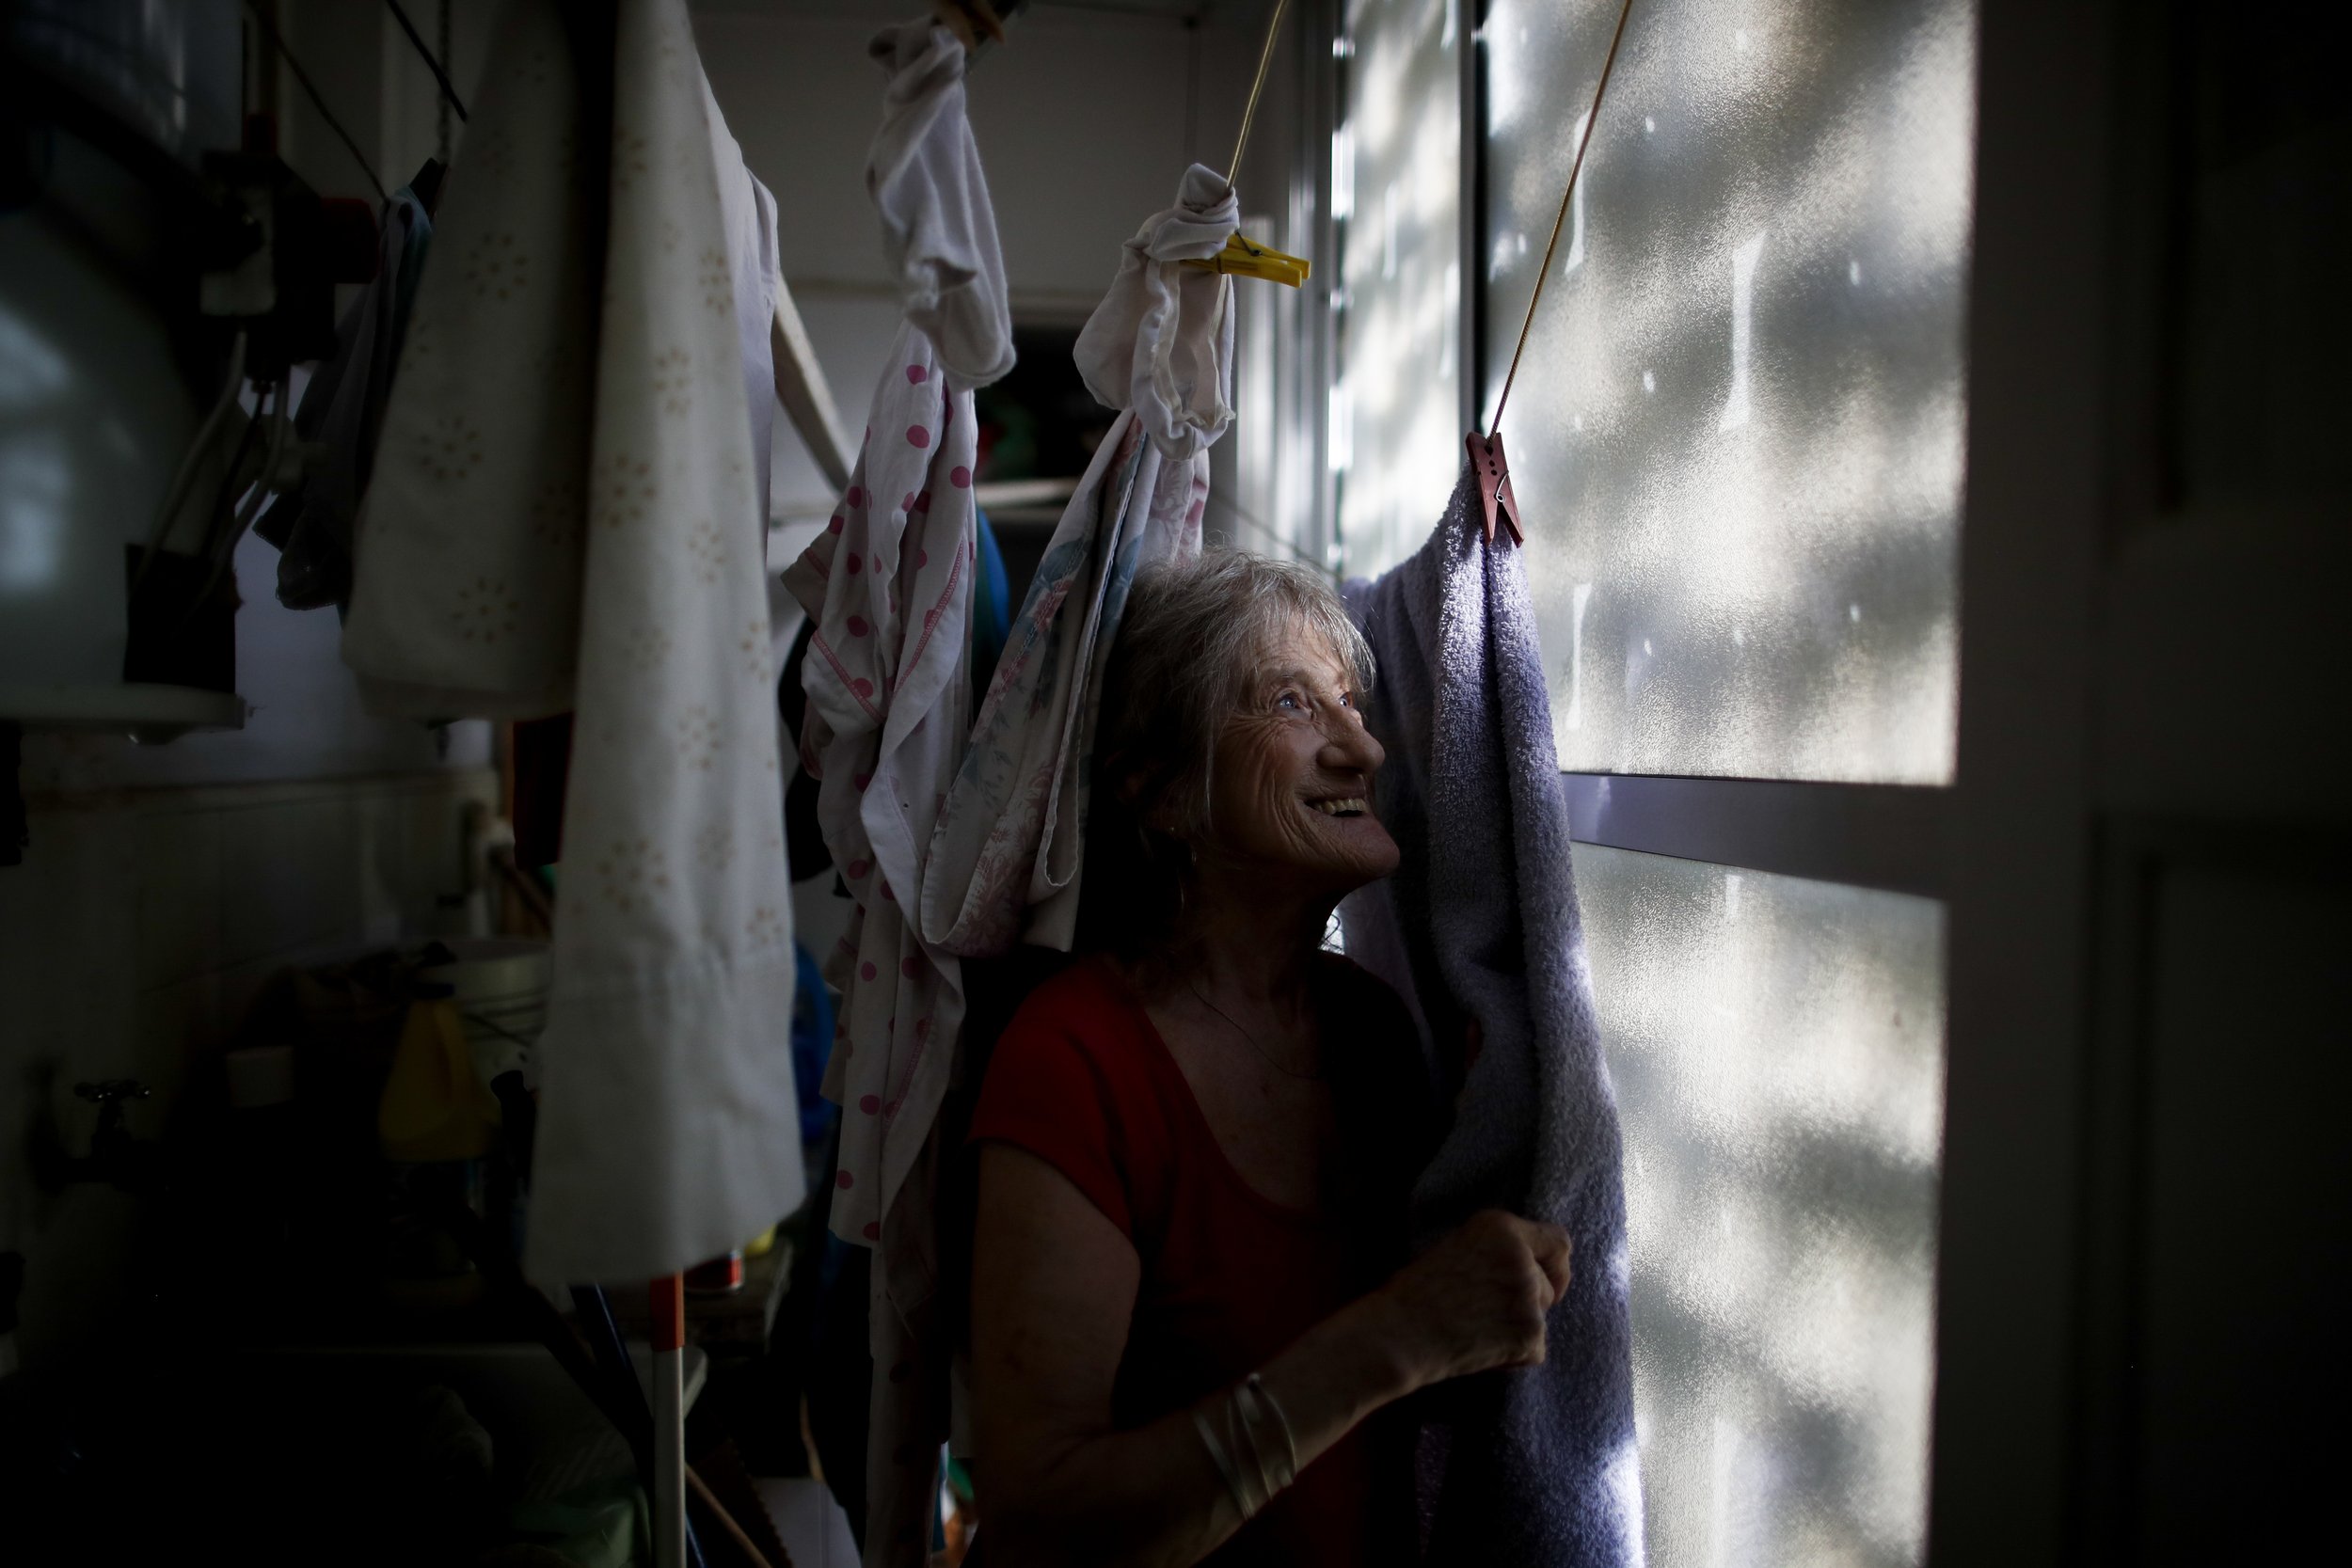  Carmela Corleto poses for a portrait amid her clothing that hangs to dry at her home in Burzaco, Argentina, where she lives alone and waits her turn to get a COVID-19 vaccine, on Feb. 18, 2021. Two months later, she got her first shot of the AstraZe